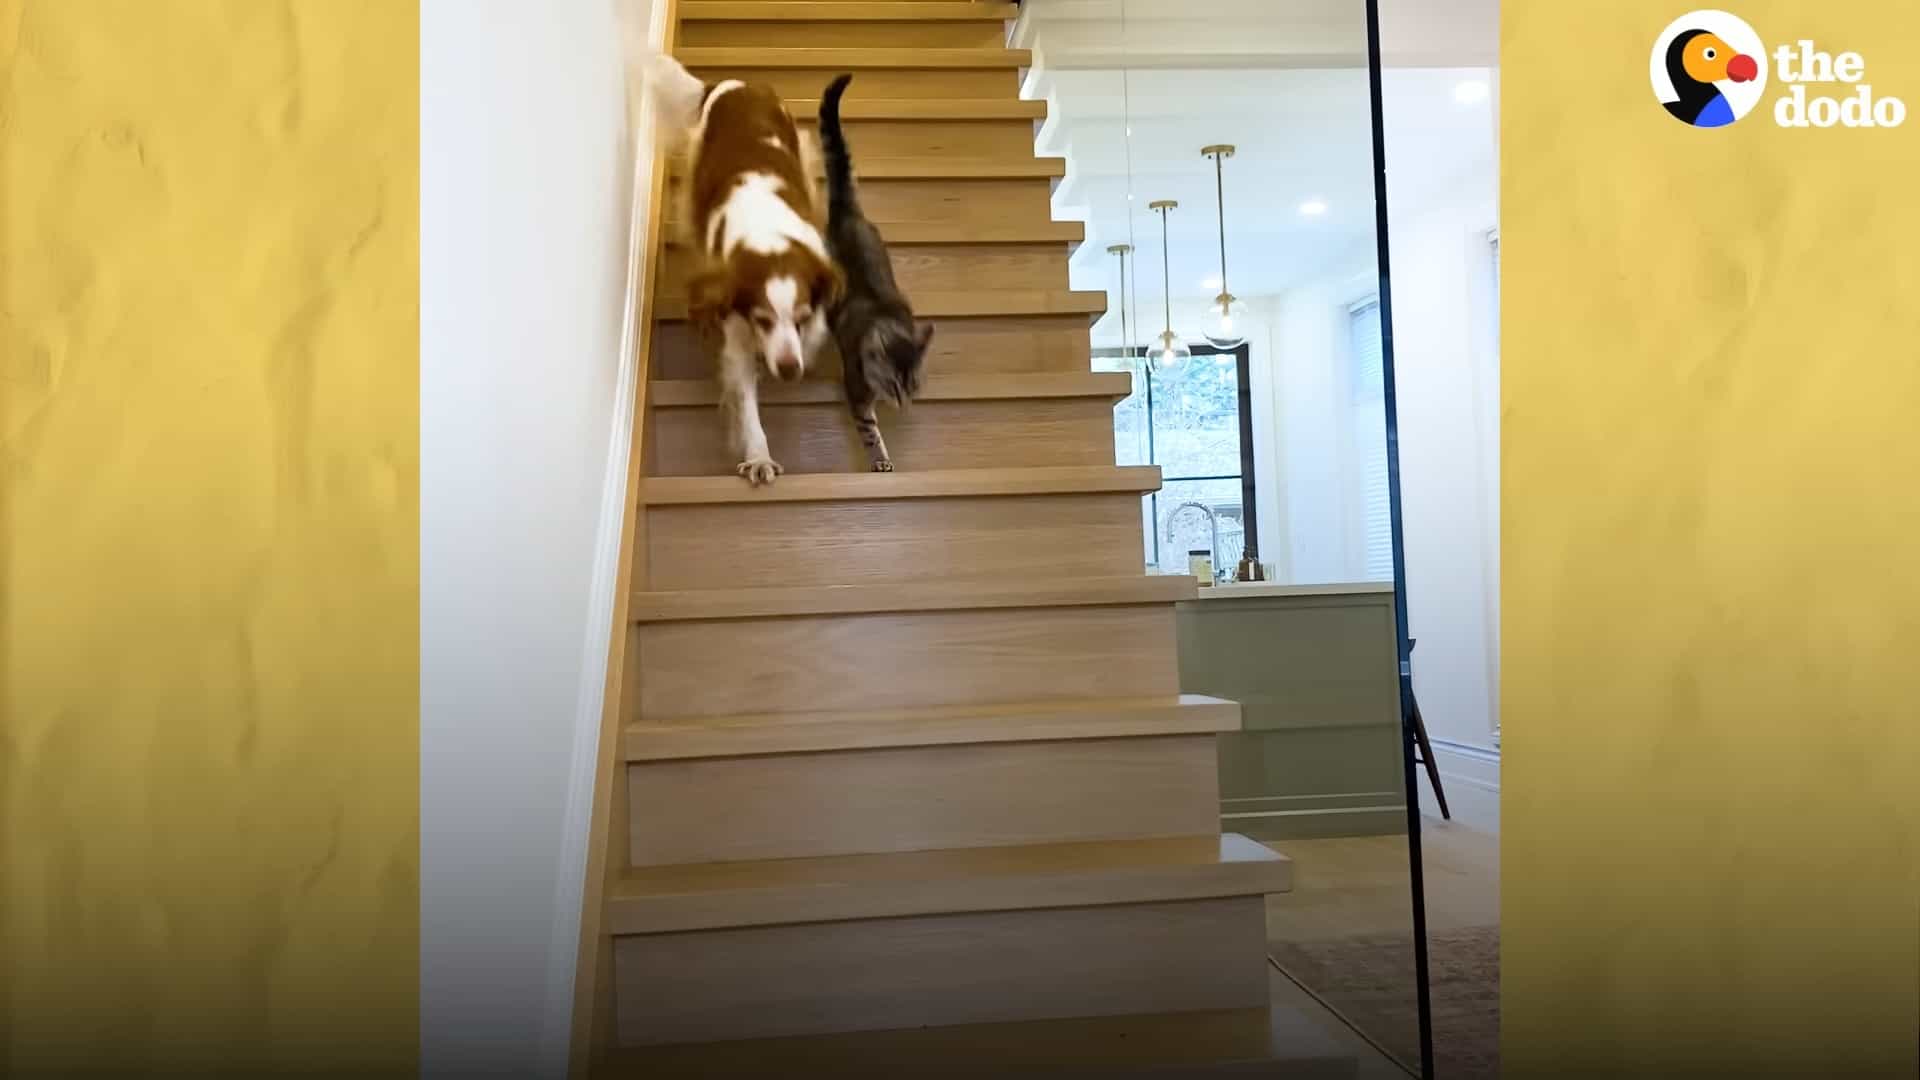 cat and dog walking on stairs in house